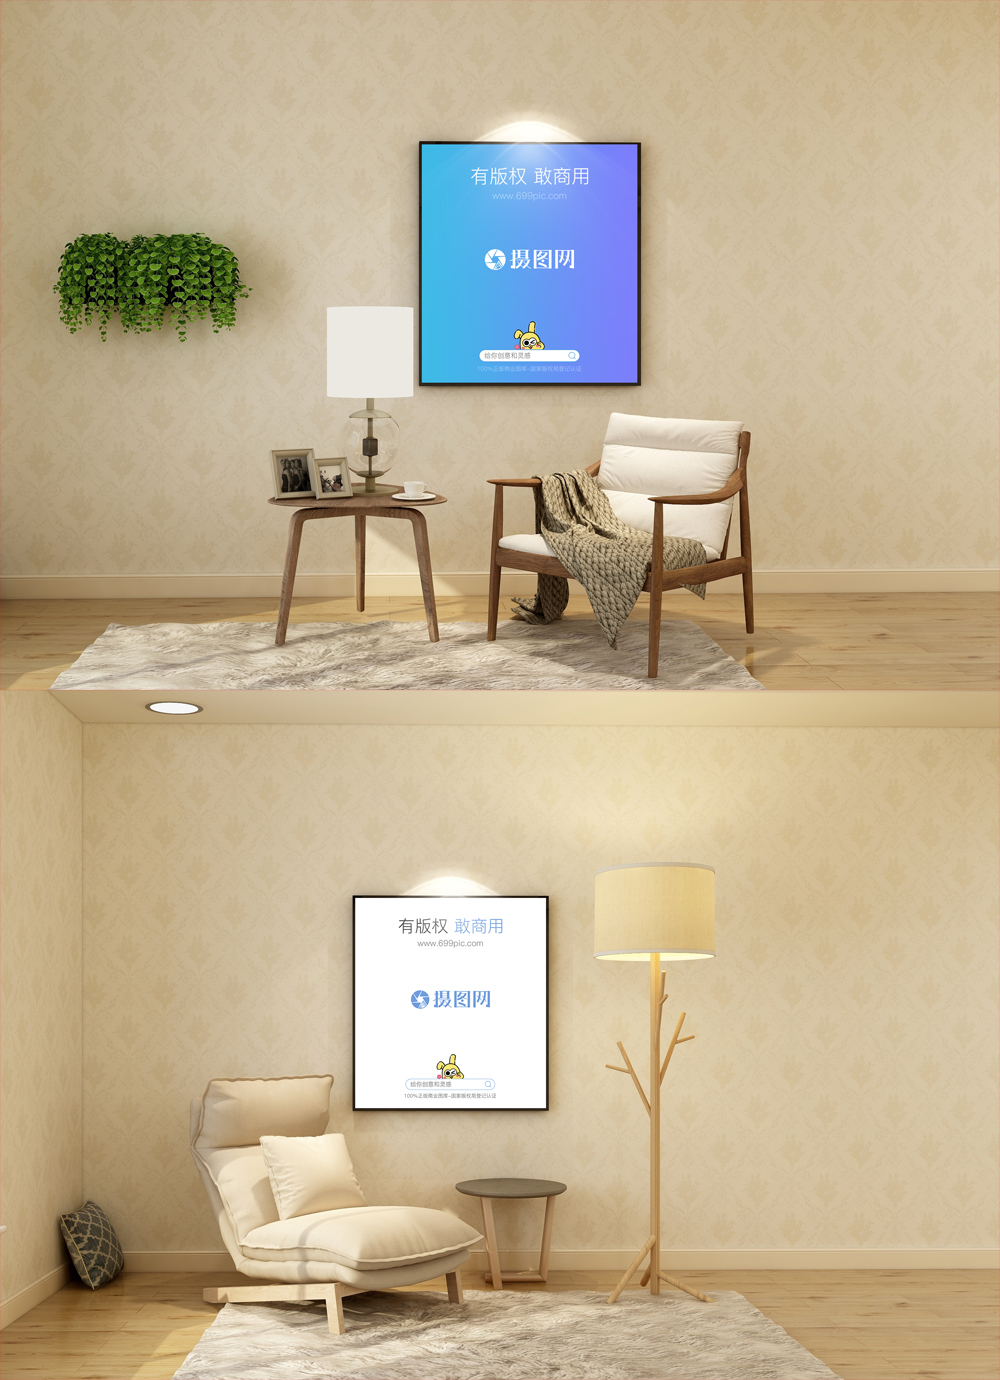 Download Hotel Decoration Painting Scene Mockup Template Image Picture Free Download 400438195 Lovepik Com PSD Mockup Templates